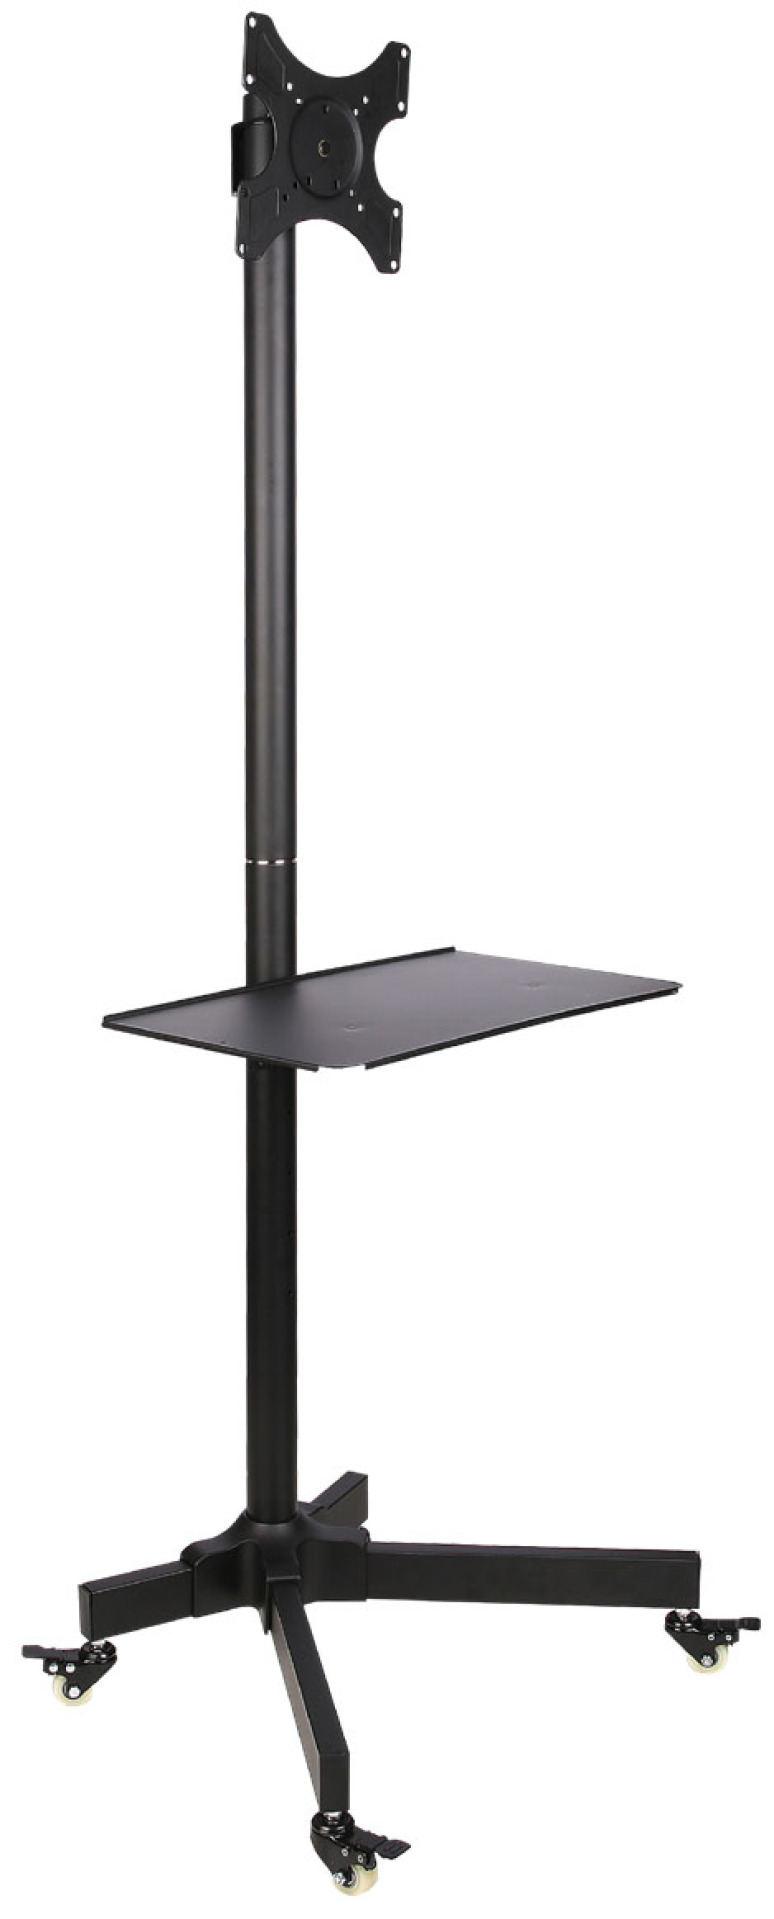 Trolley floor support for LCD LED TV 19-37", with shelf